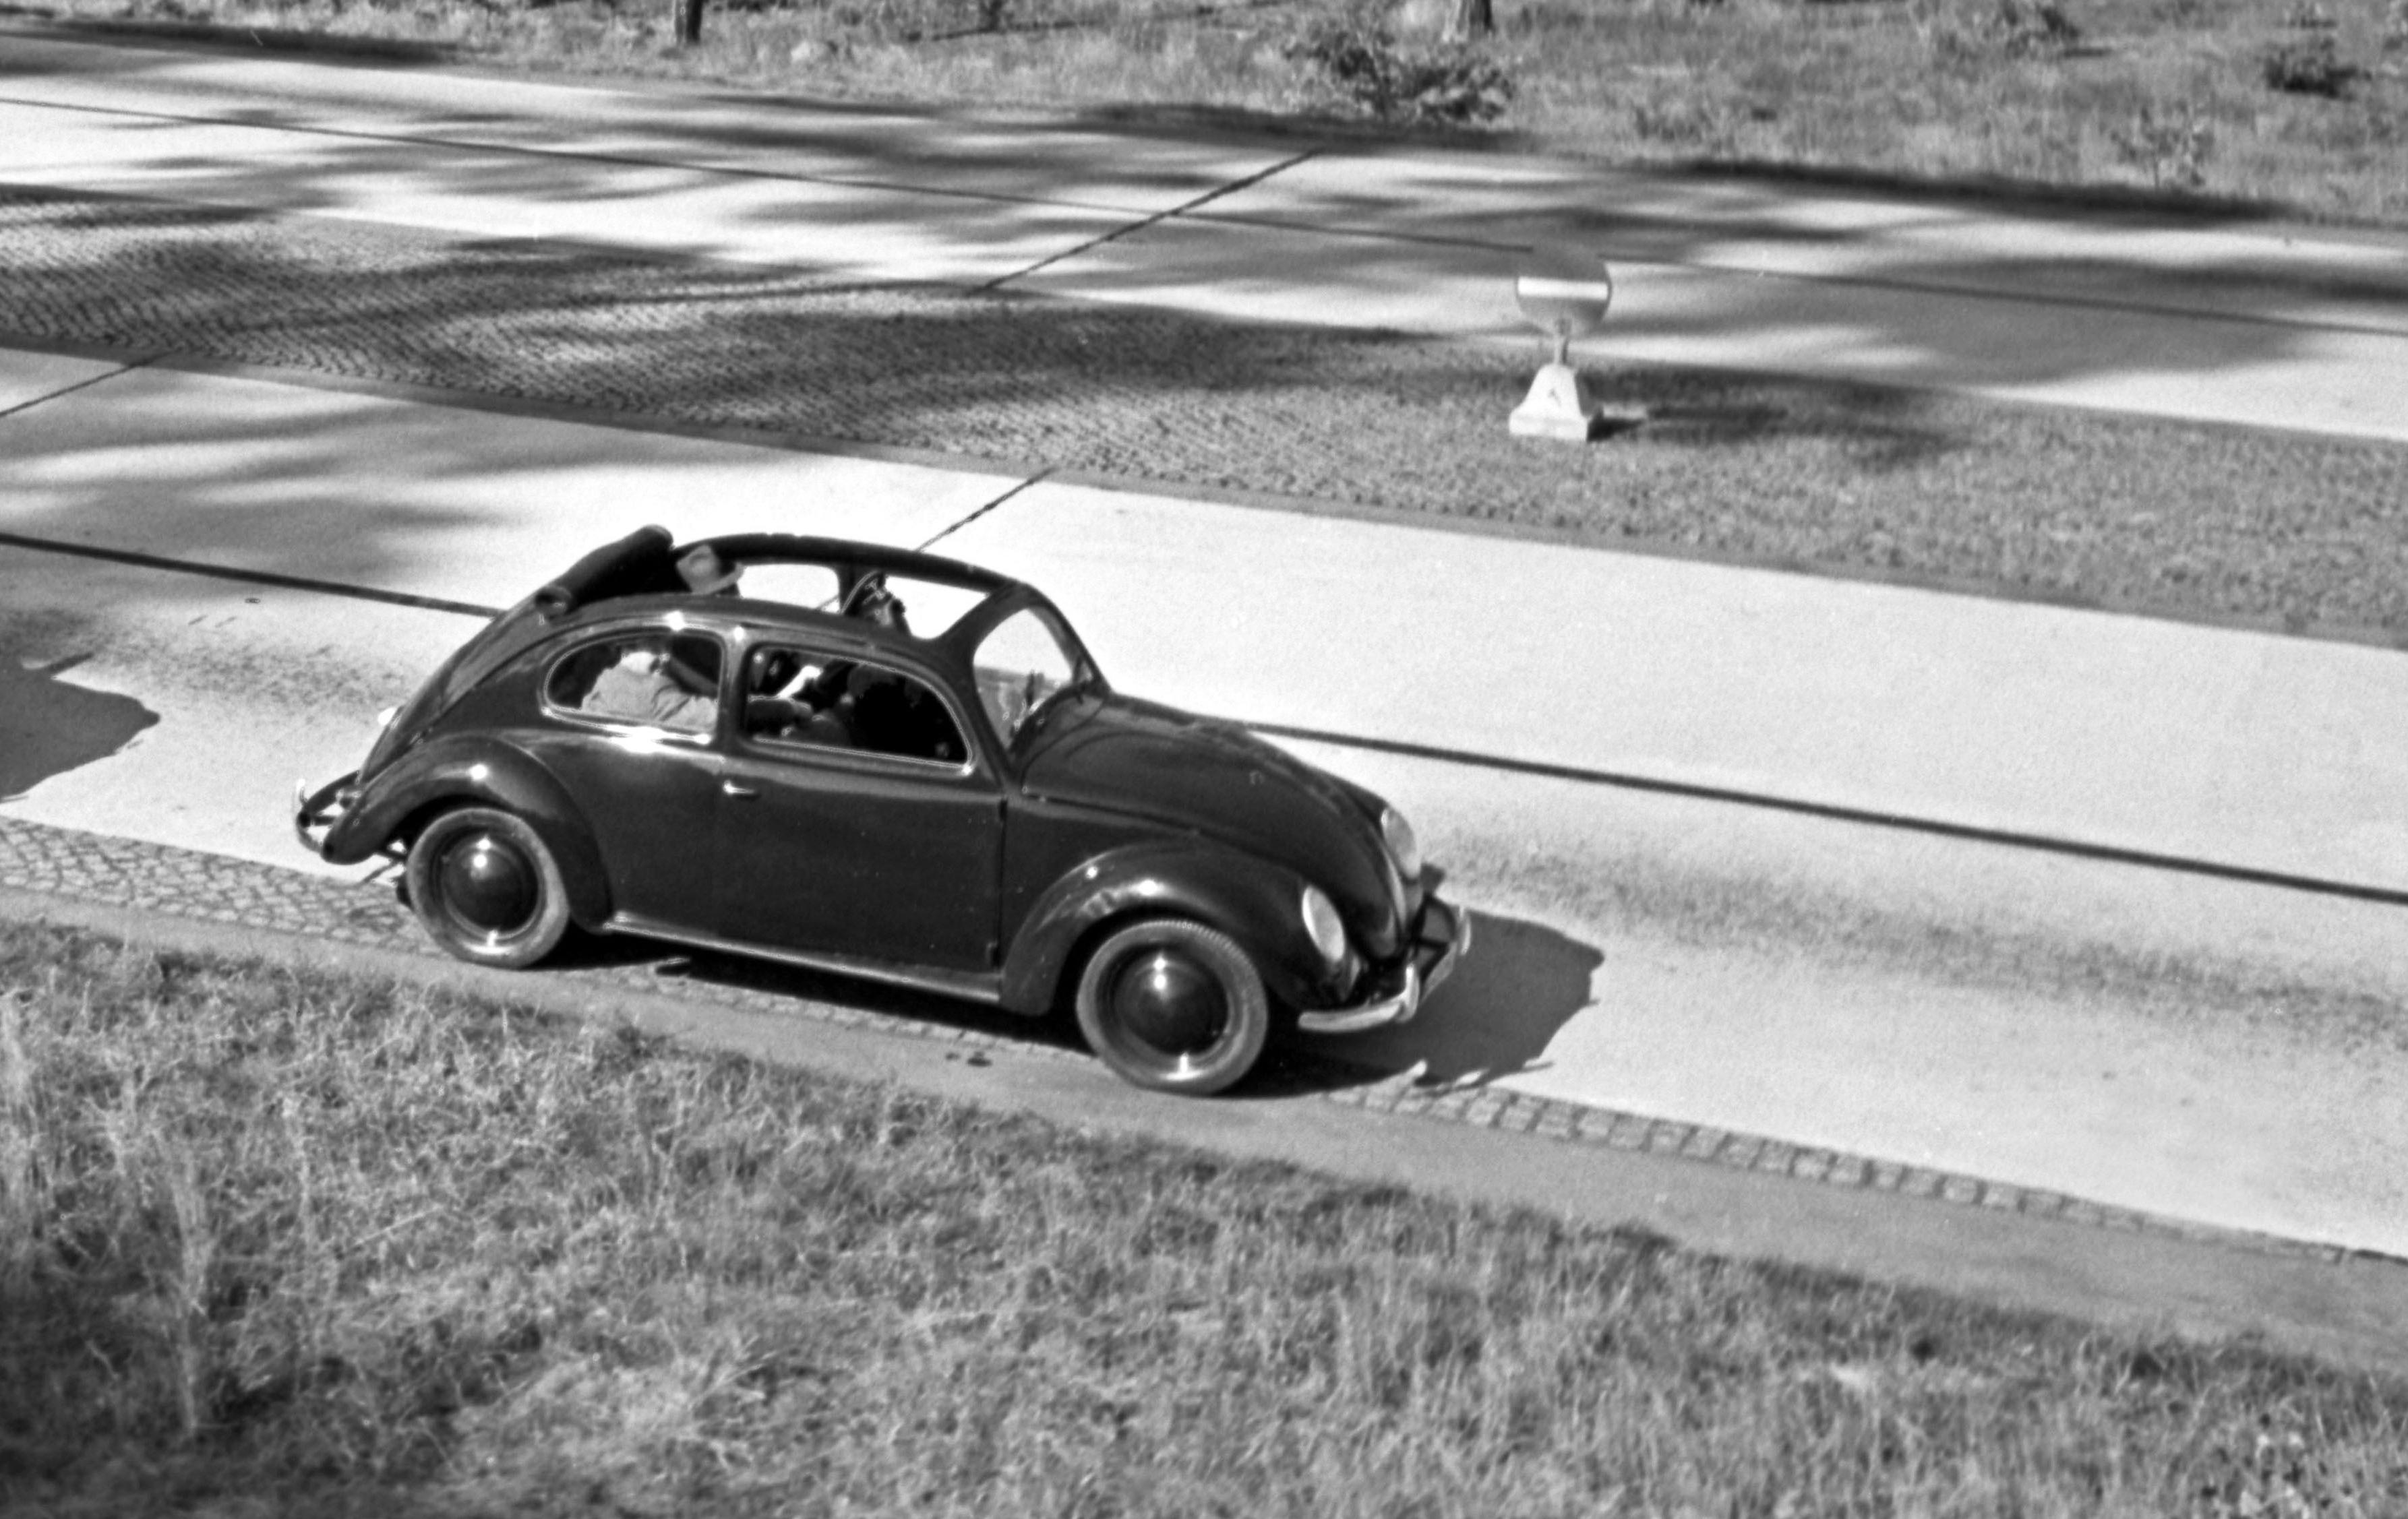 Three models of the Volkswagen beetle driving, Germany 1938 Printed Later  - Photograph by Henning Nolte